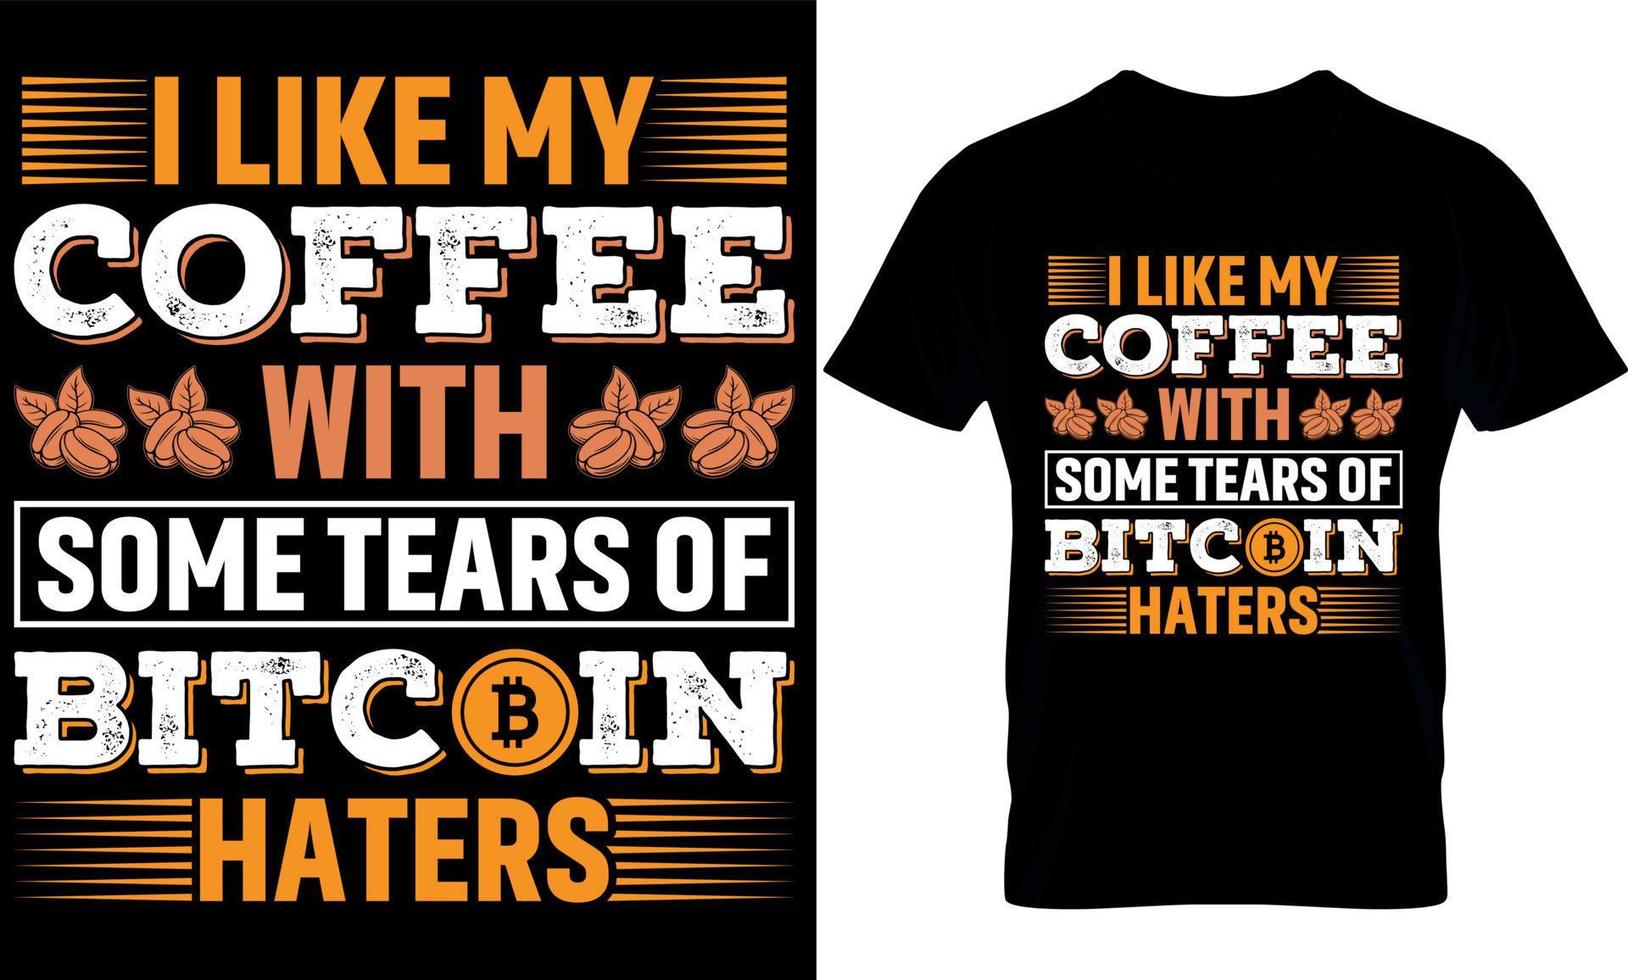 I Like My Coffee With Tears Of Bitcoin Haters. coffee and bitcoin typography tshirt design vector